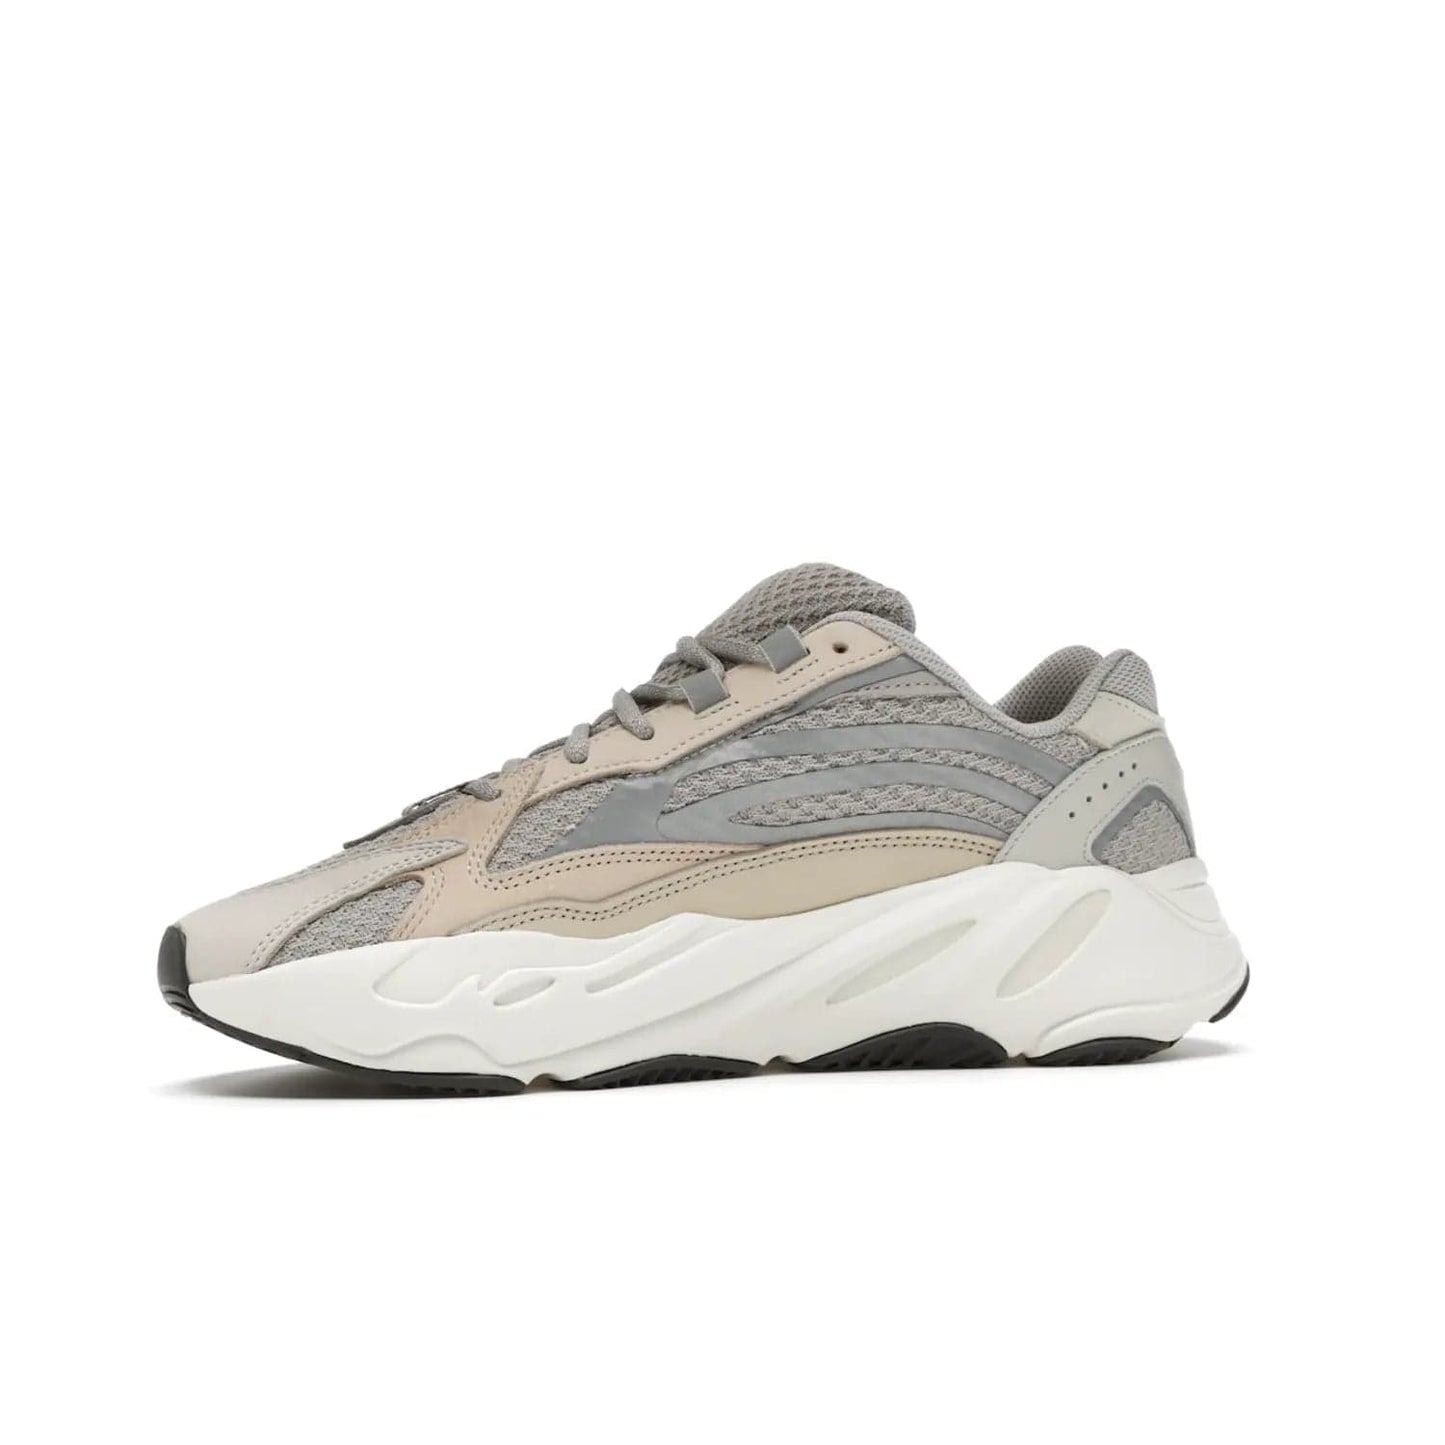 adidas Yeezy Boost 700 V2 Cream - Image 17 - Only at www.BallersClubKickz.com - Add style and luxury to your wardrobe with the adidas Yeezy 700 V2 Cream. Featuring a unique reflective upper, leather overlays, mesh underlays and the signature BOOST midsole, this silhouette is perfect for any stylish wardrobe.